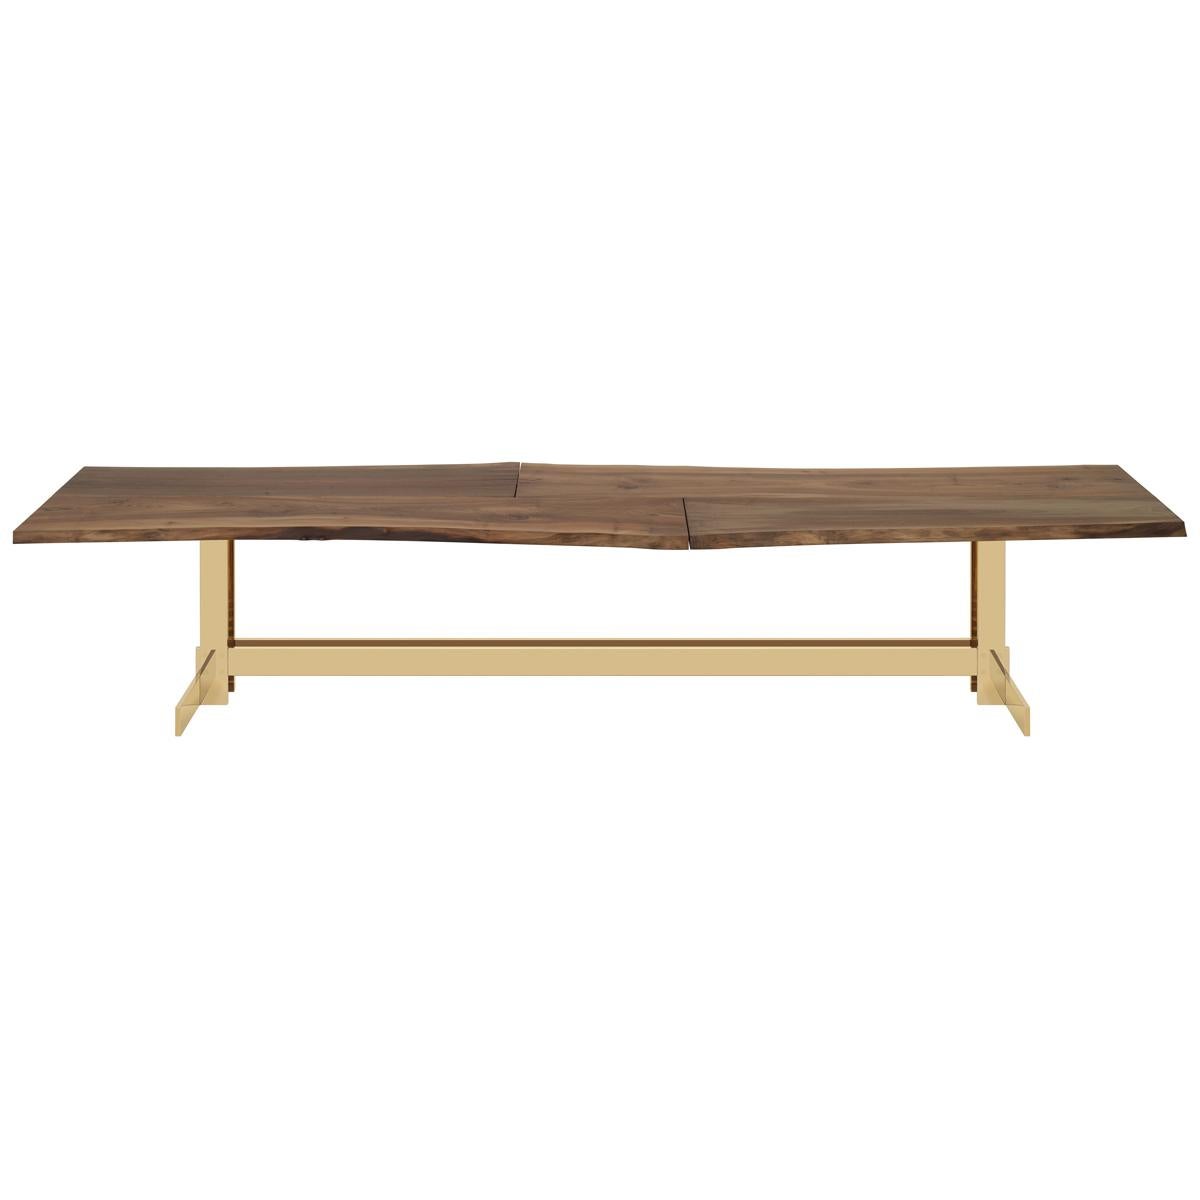 e15 Selected Trunk II Table with Brass Polished Base by Philipp Mainzer